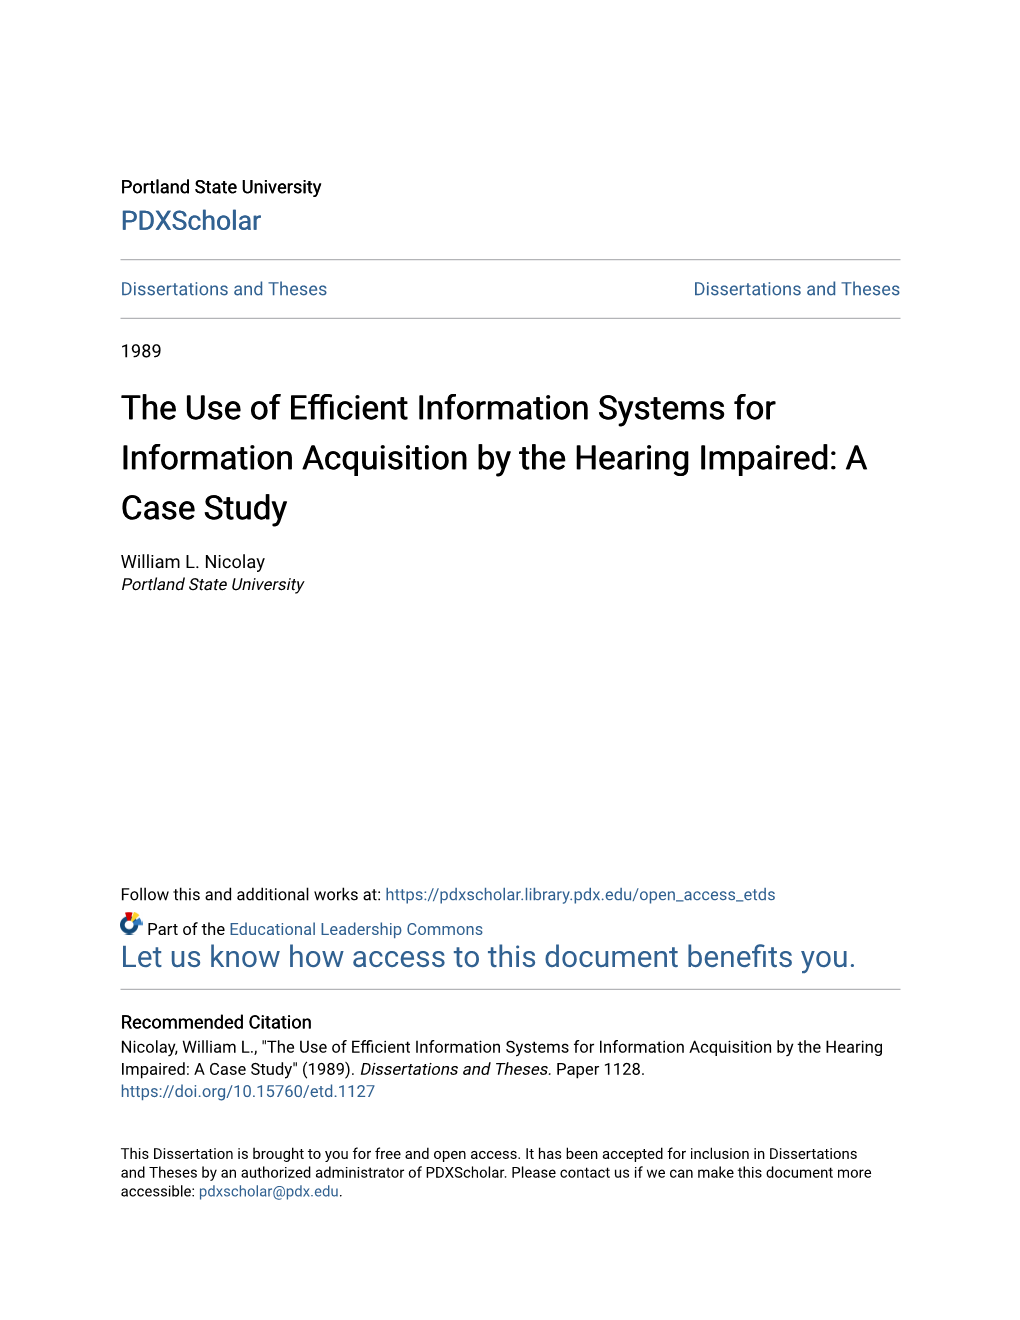 The Use of Efficient Information Systems for Information Acquisition by the Hearing Impaired: a Case Study